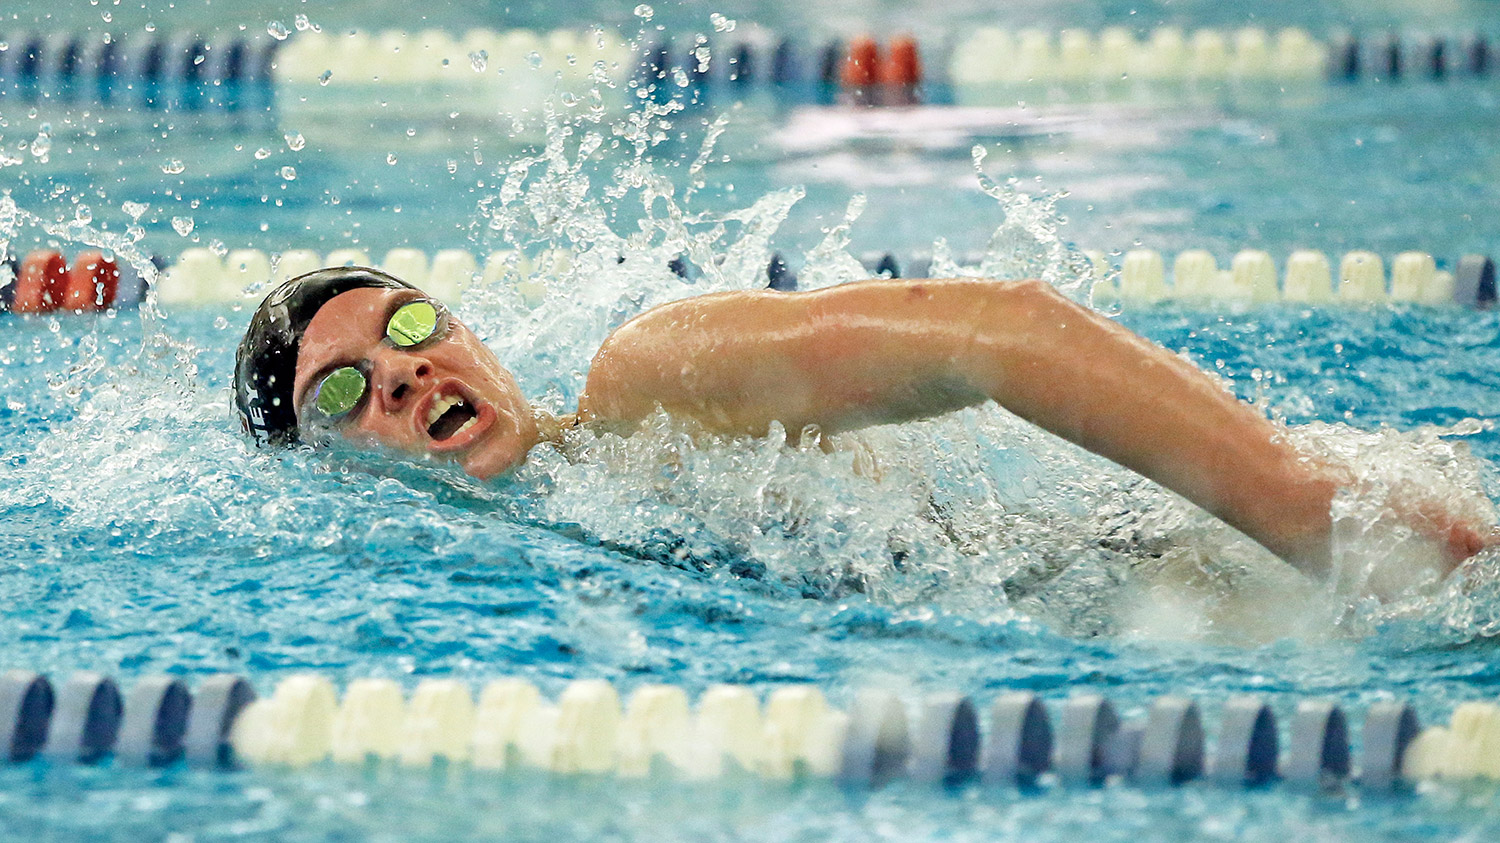 Caroline Mahoney was part of the Cape Elizabeth relay team that set a school – and pool – record in the 400-yard freestyle relay Thursday, with a time of 3:40.42.